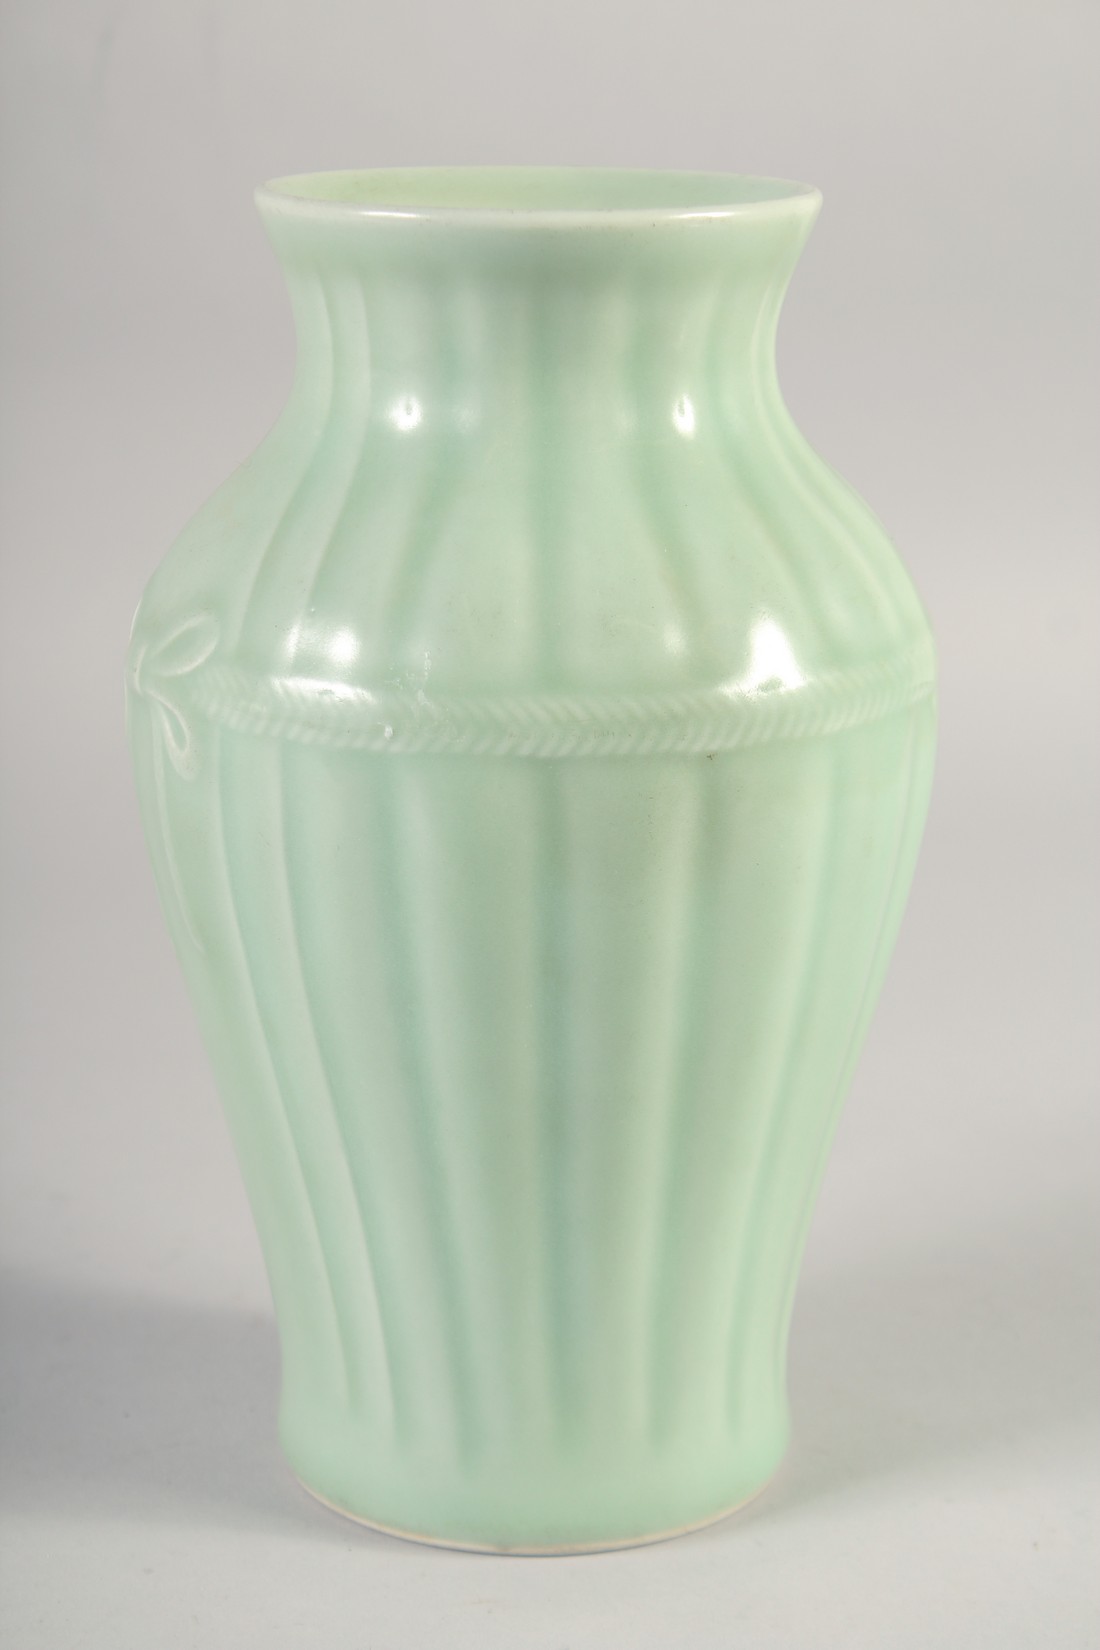 A CHINESE CELADON GLAZE PORCELAIN VASE, with six-character mark to base, 23cm high. - Image 2 of 5